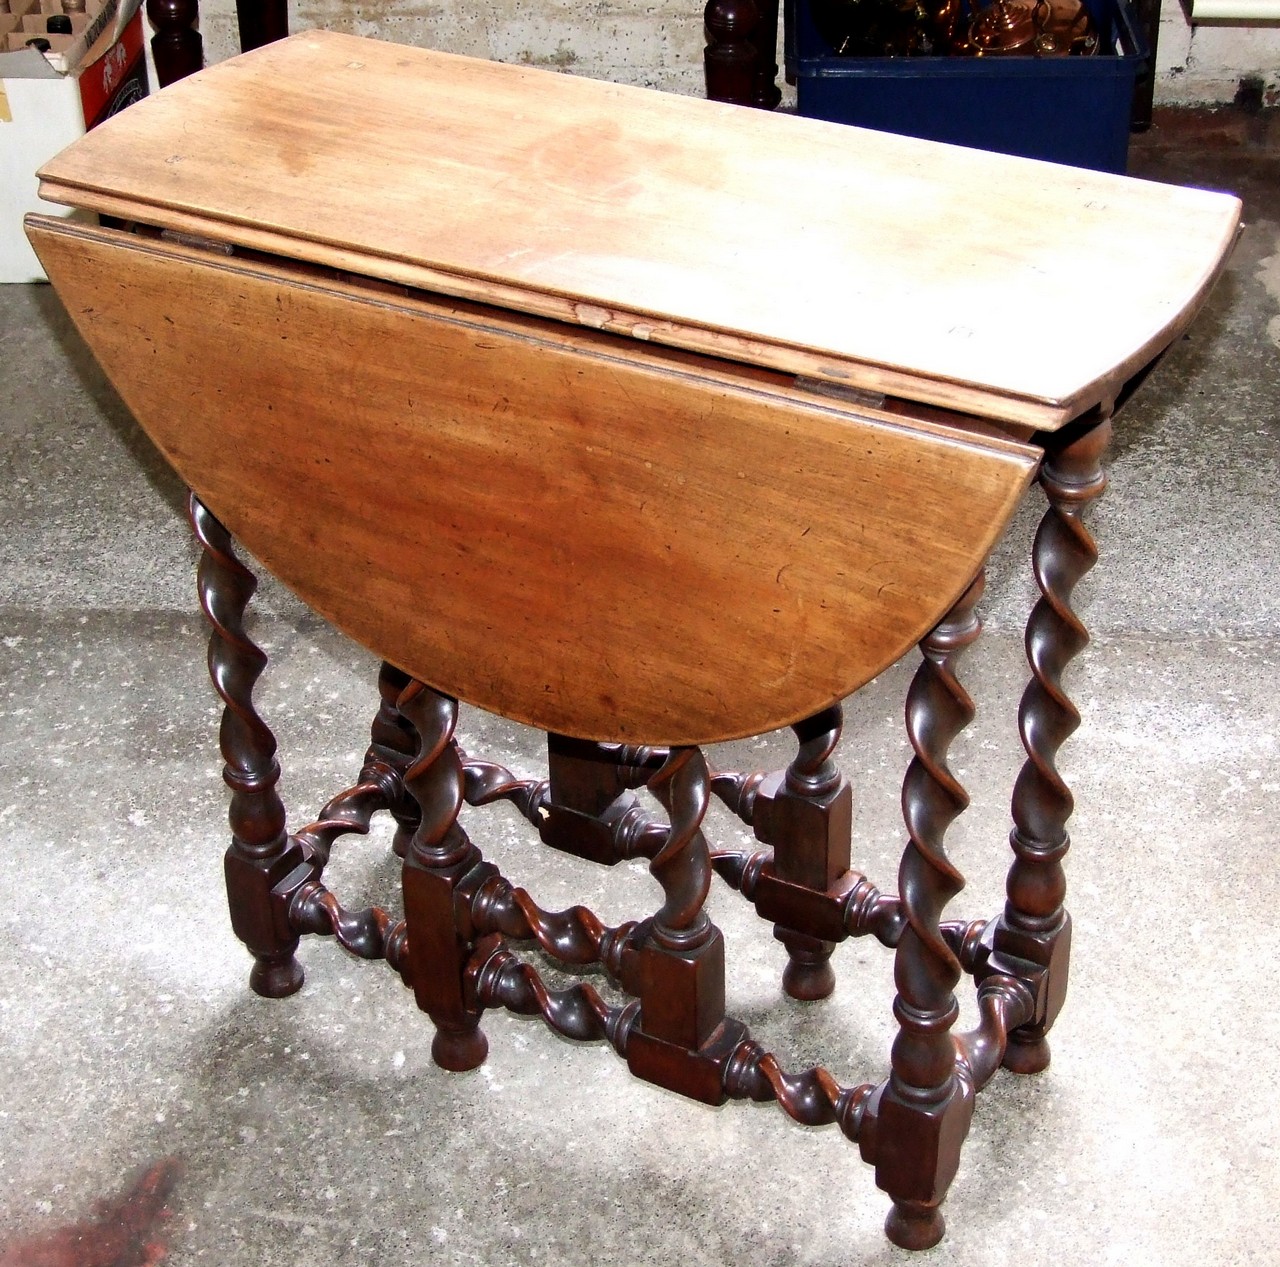 Small Mahogany Drop-leaf Table with Barley Twist and Carved Legs. £100/200